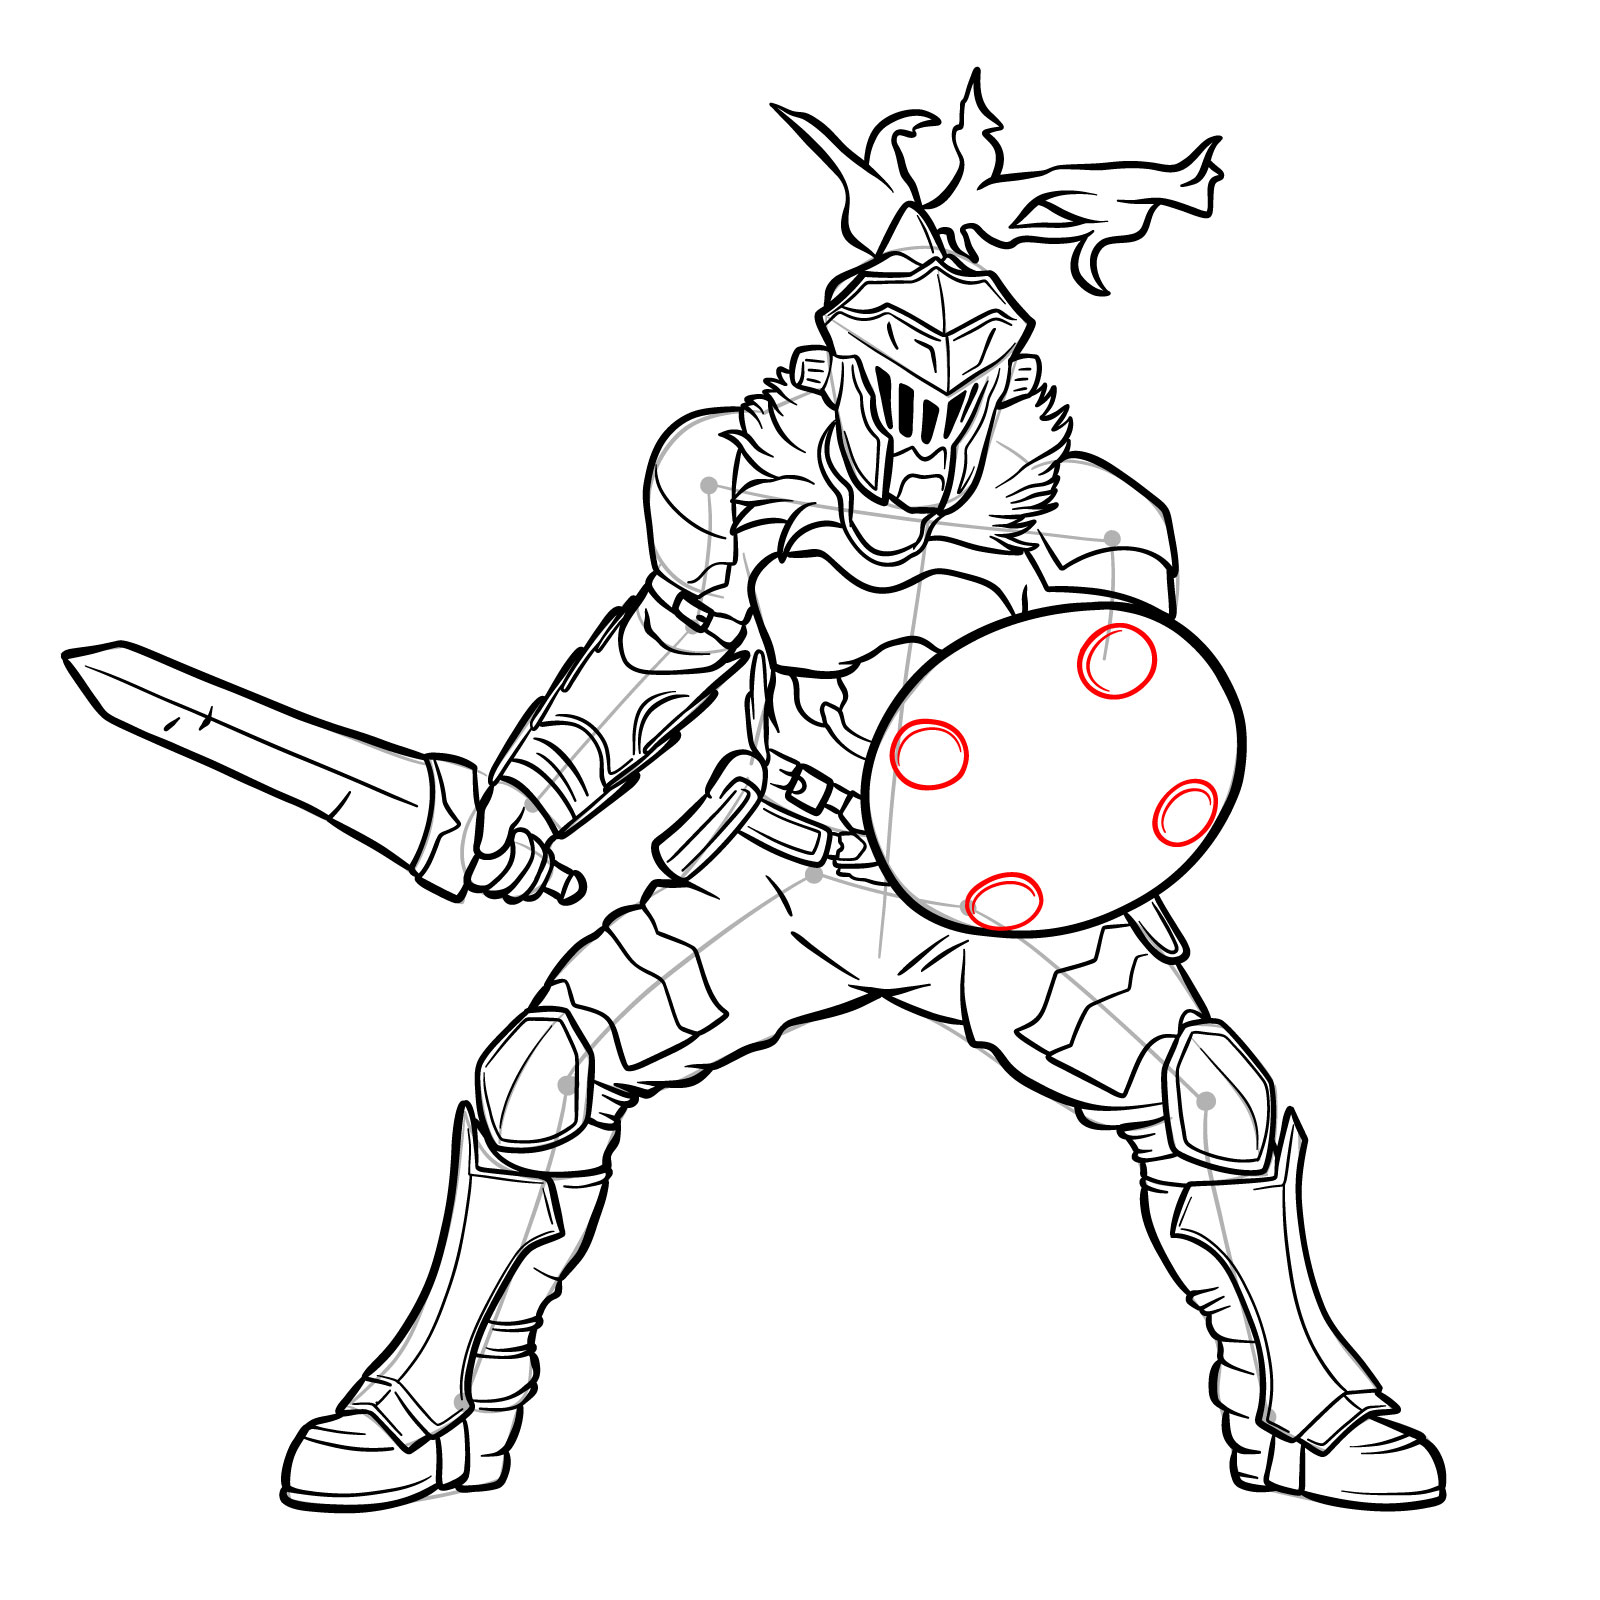 How to Draw Goblin Slayer in battle stance - step 39